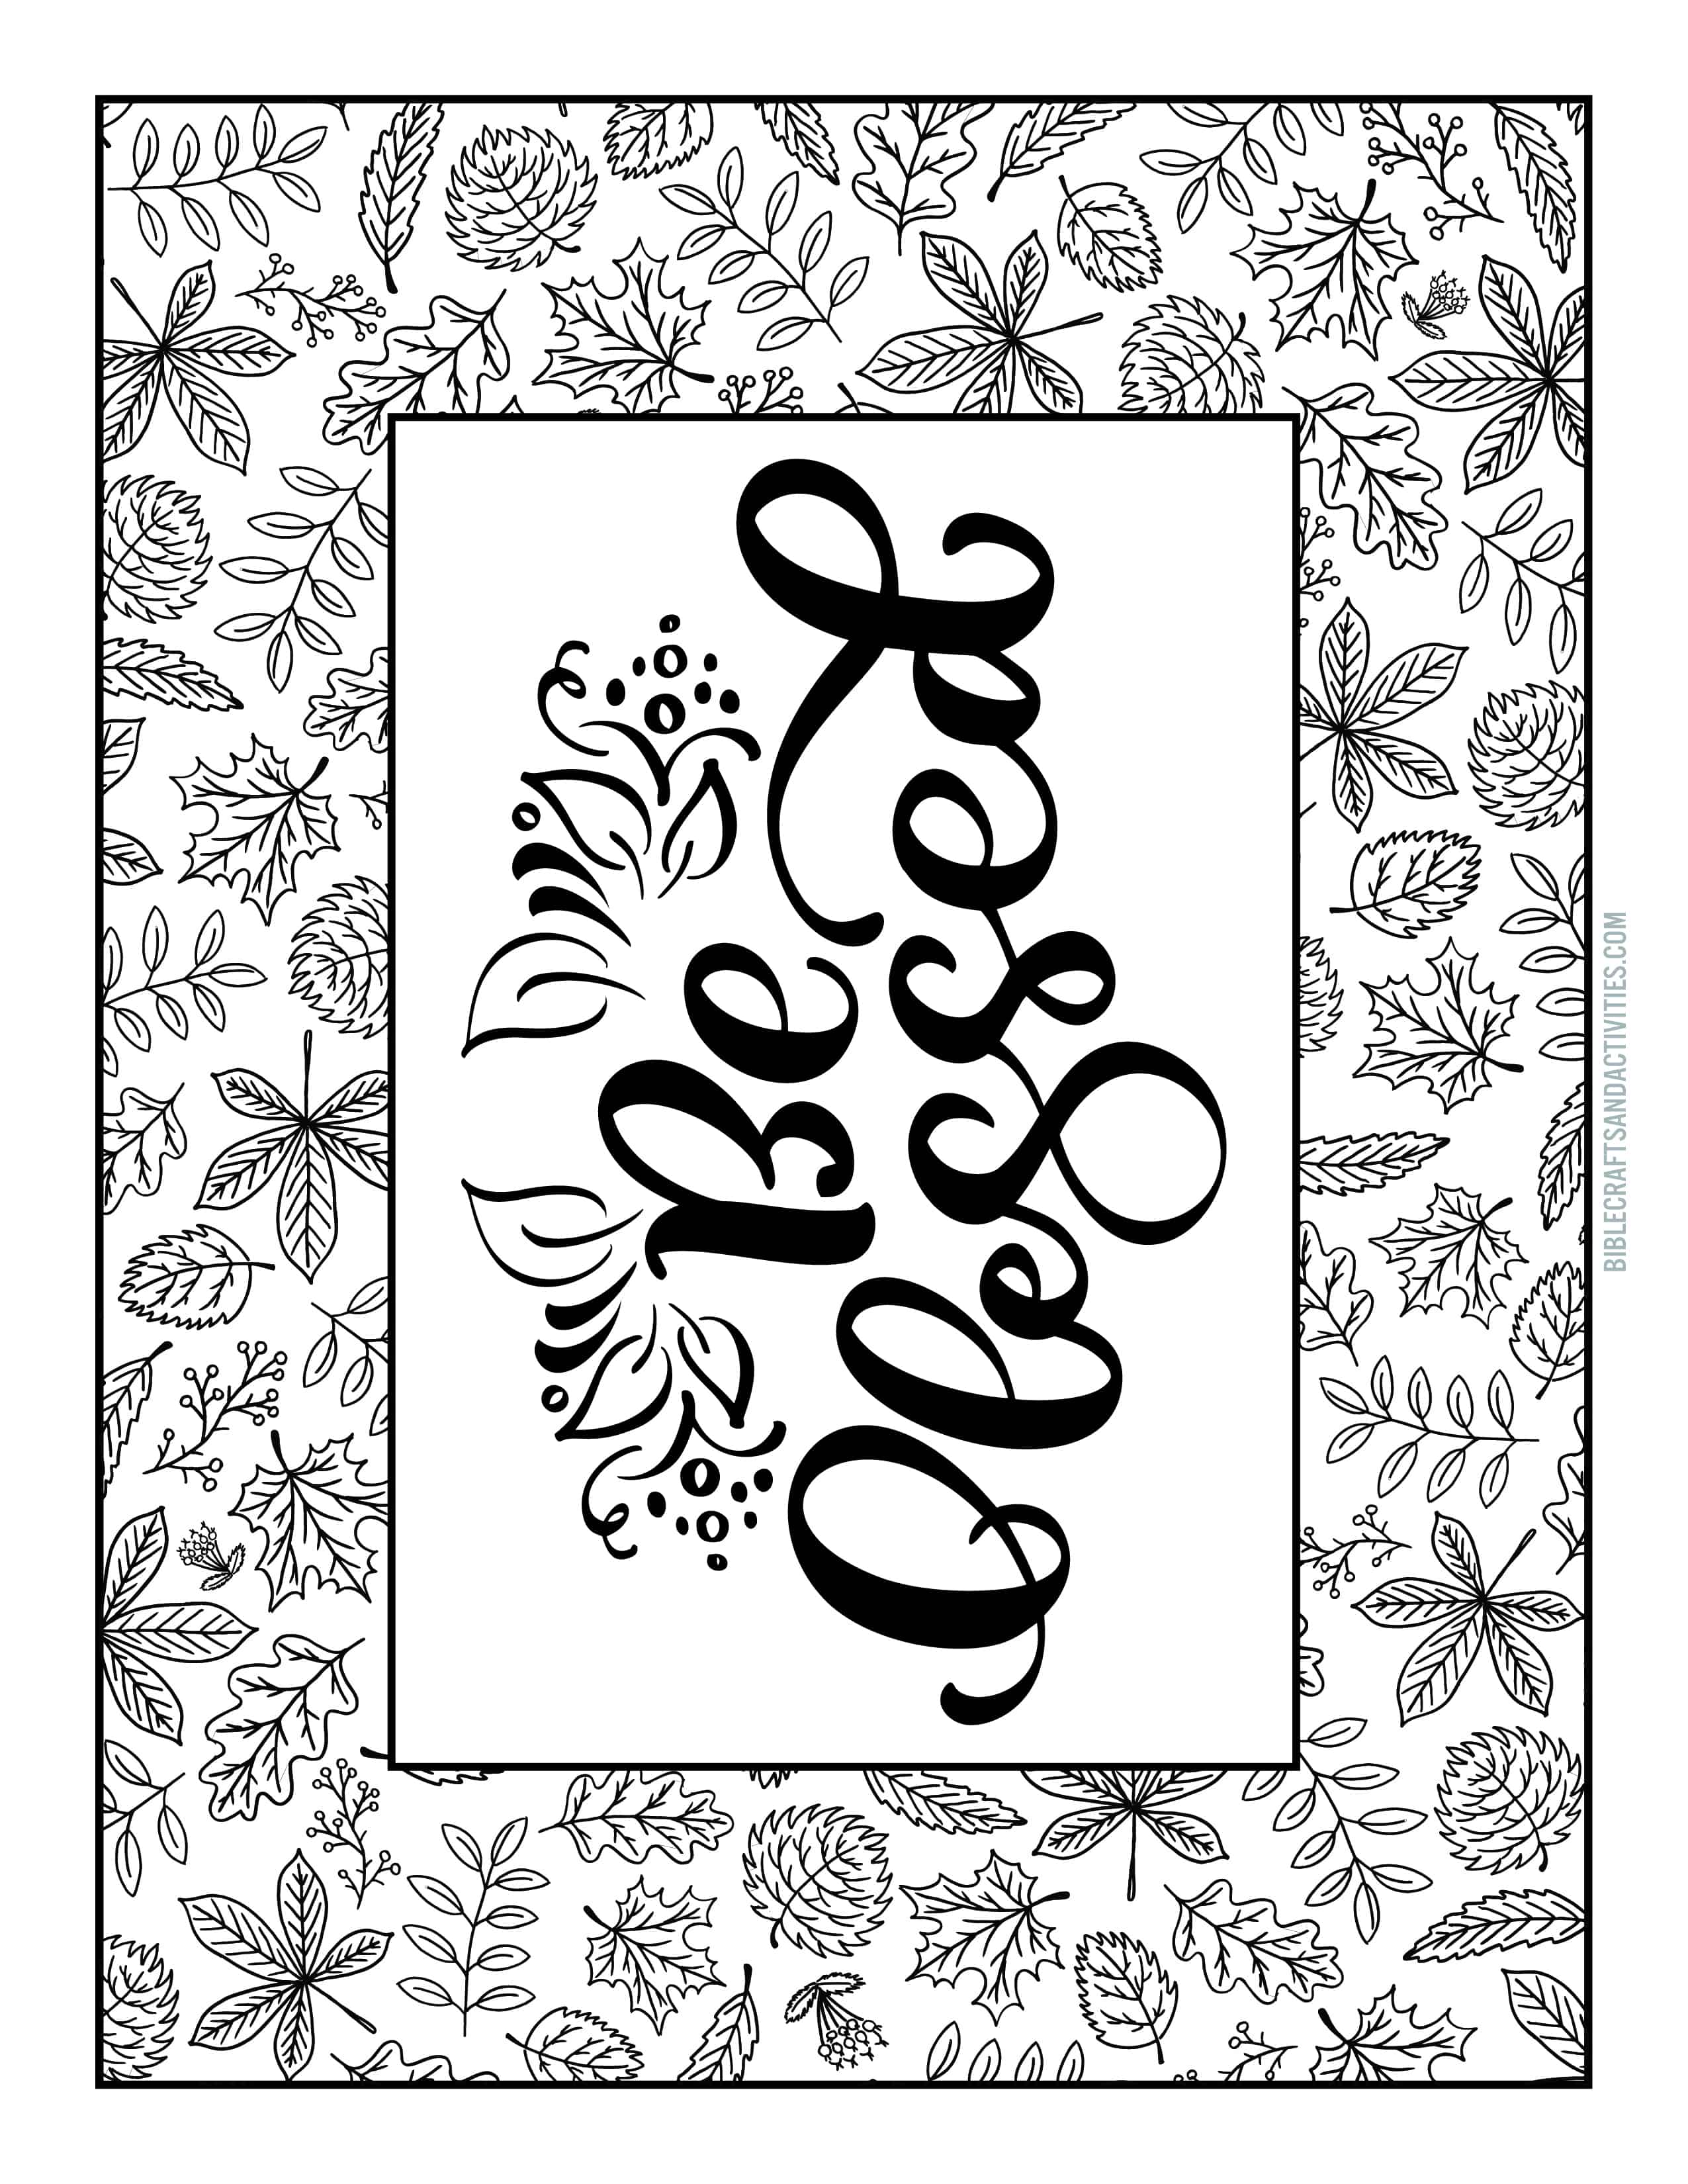 Calligraphy Alphabet Adult Coloring Pages